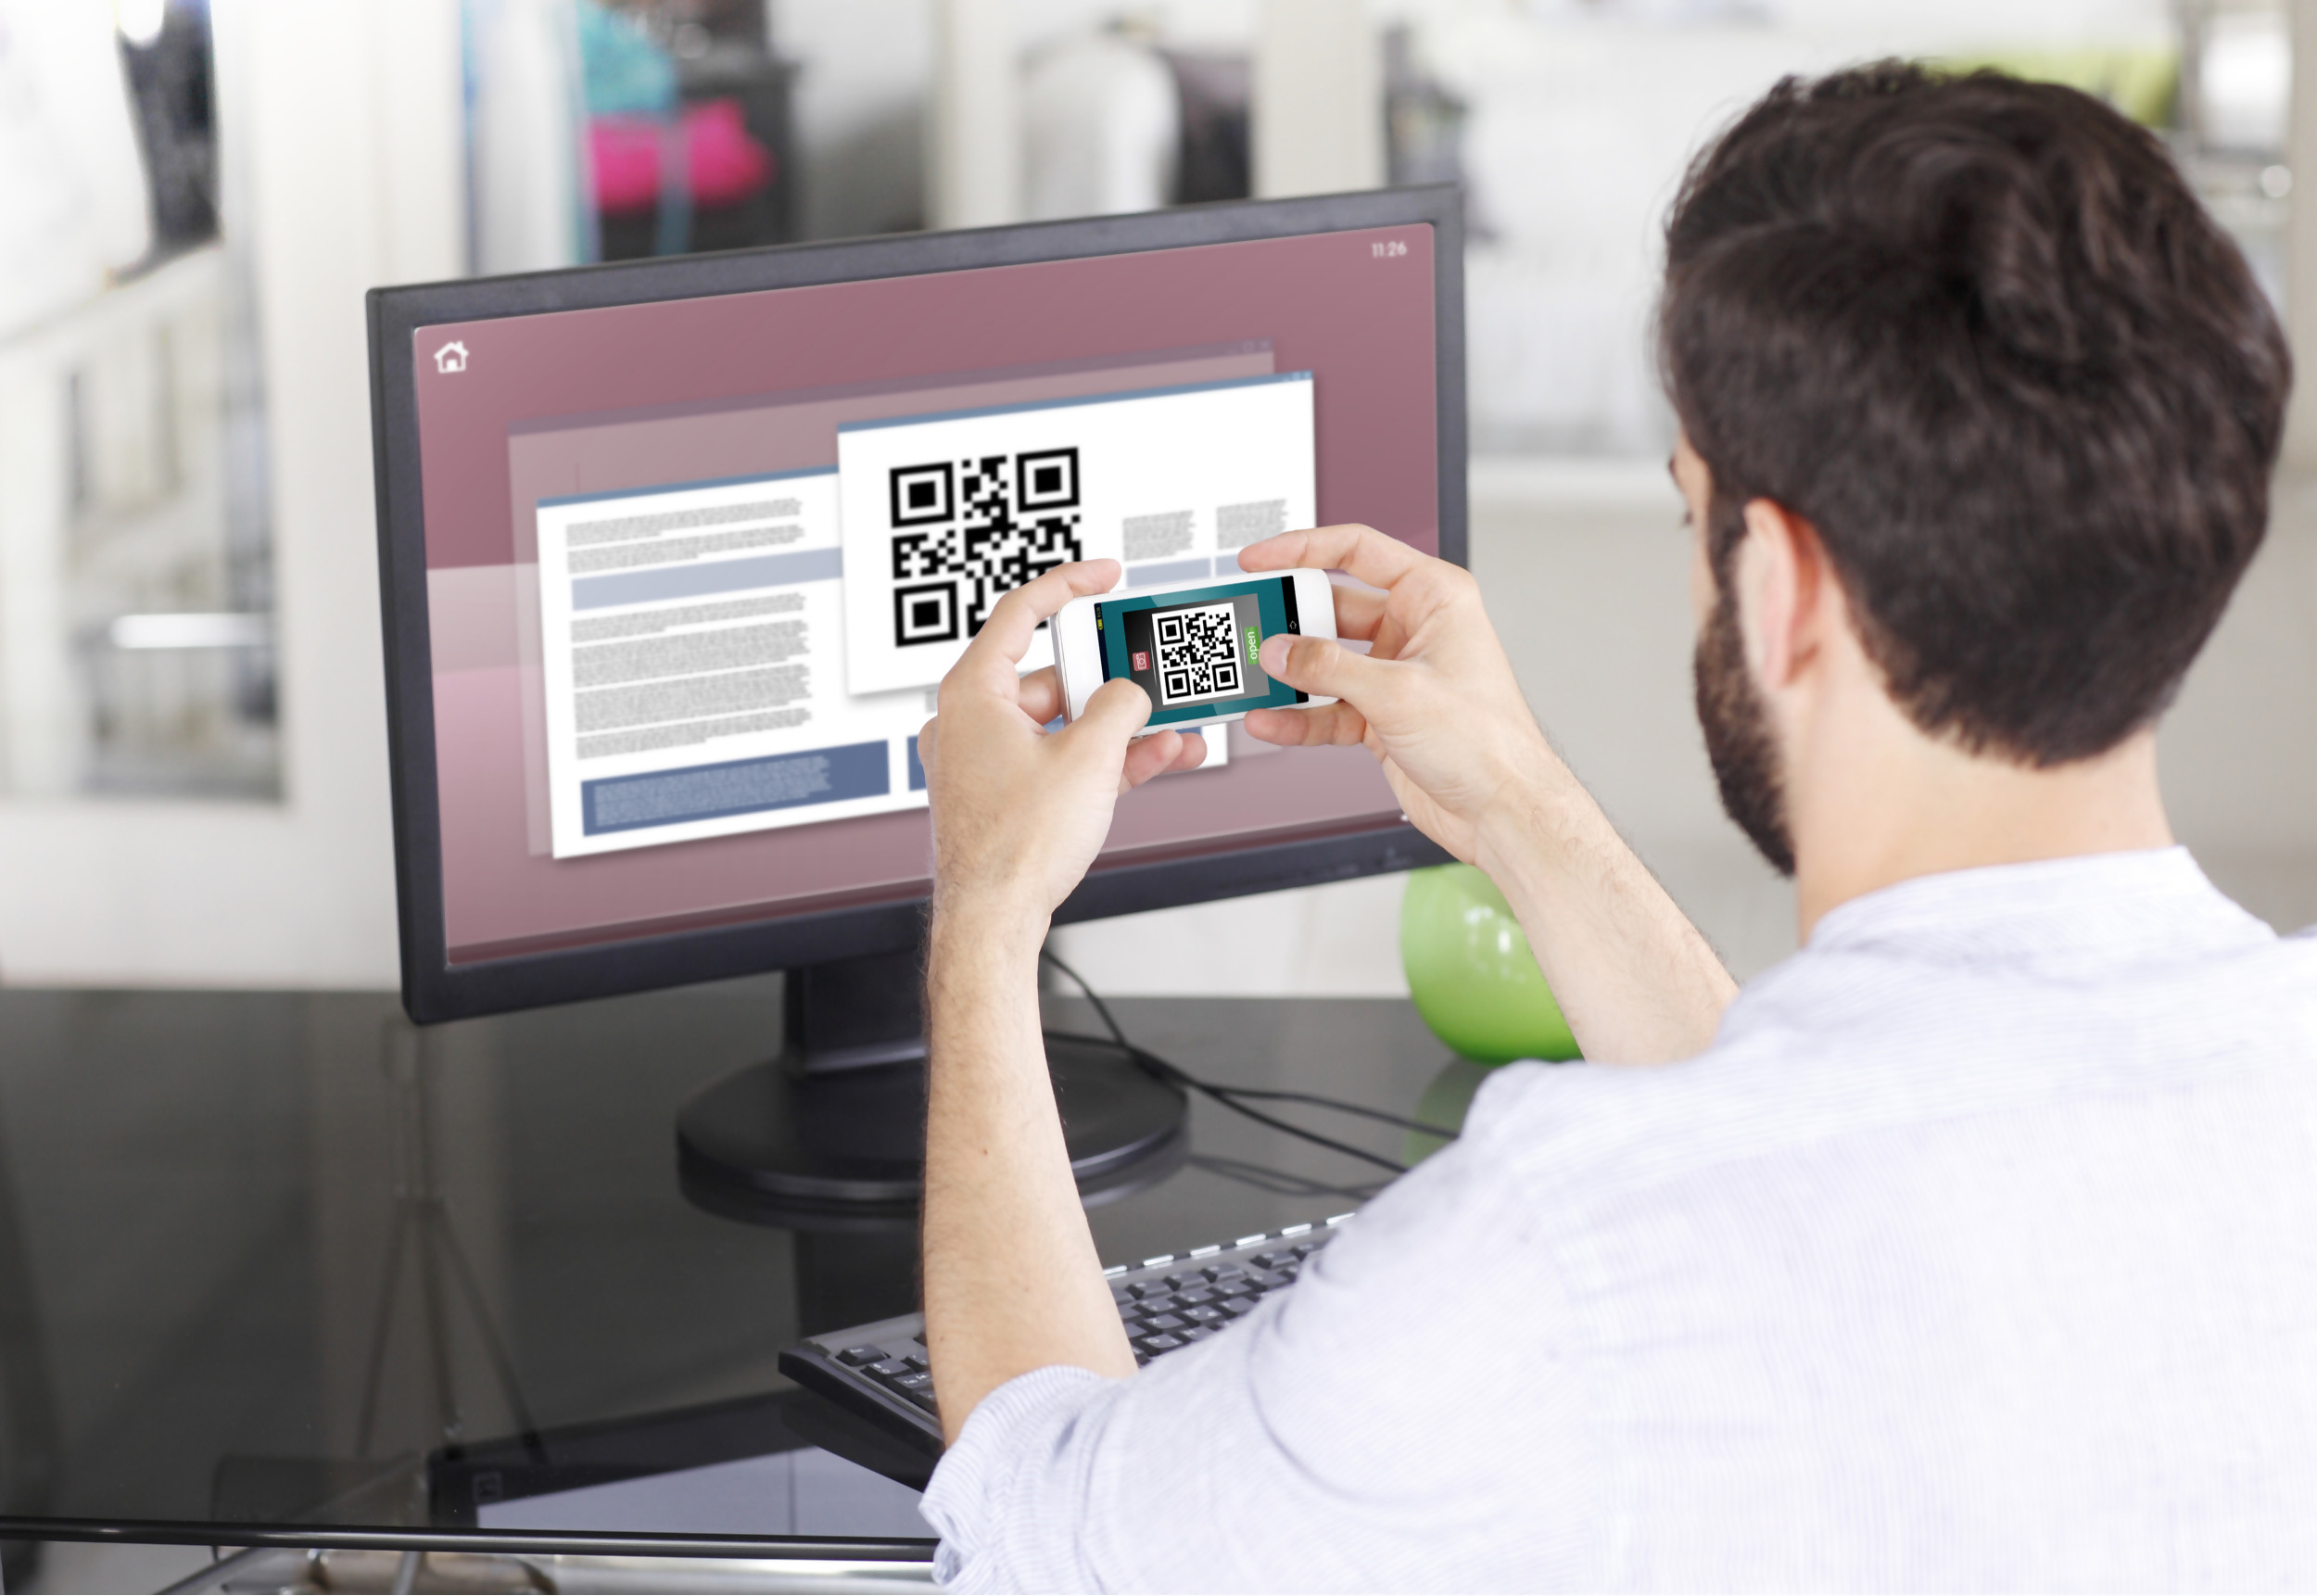 IB Key Activation with QR Code | IB Knowledge Base